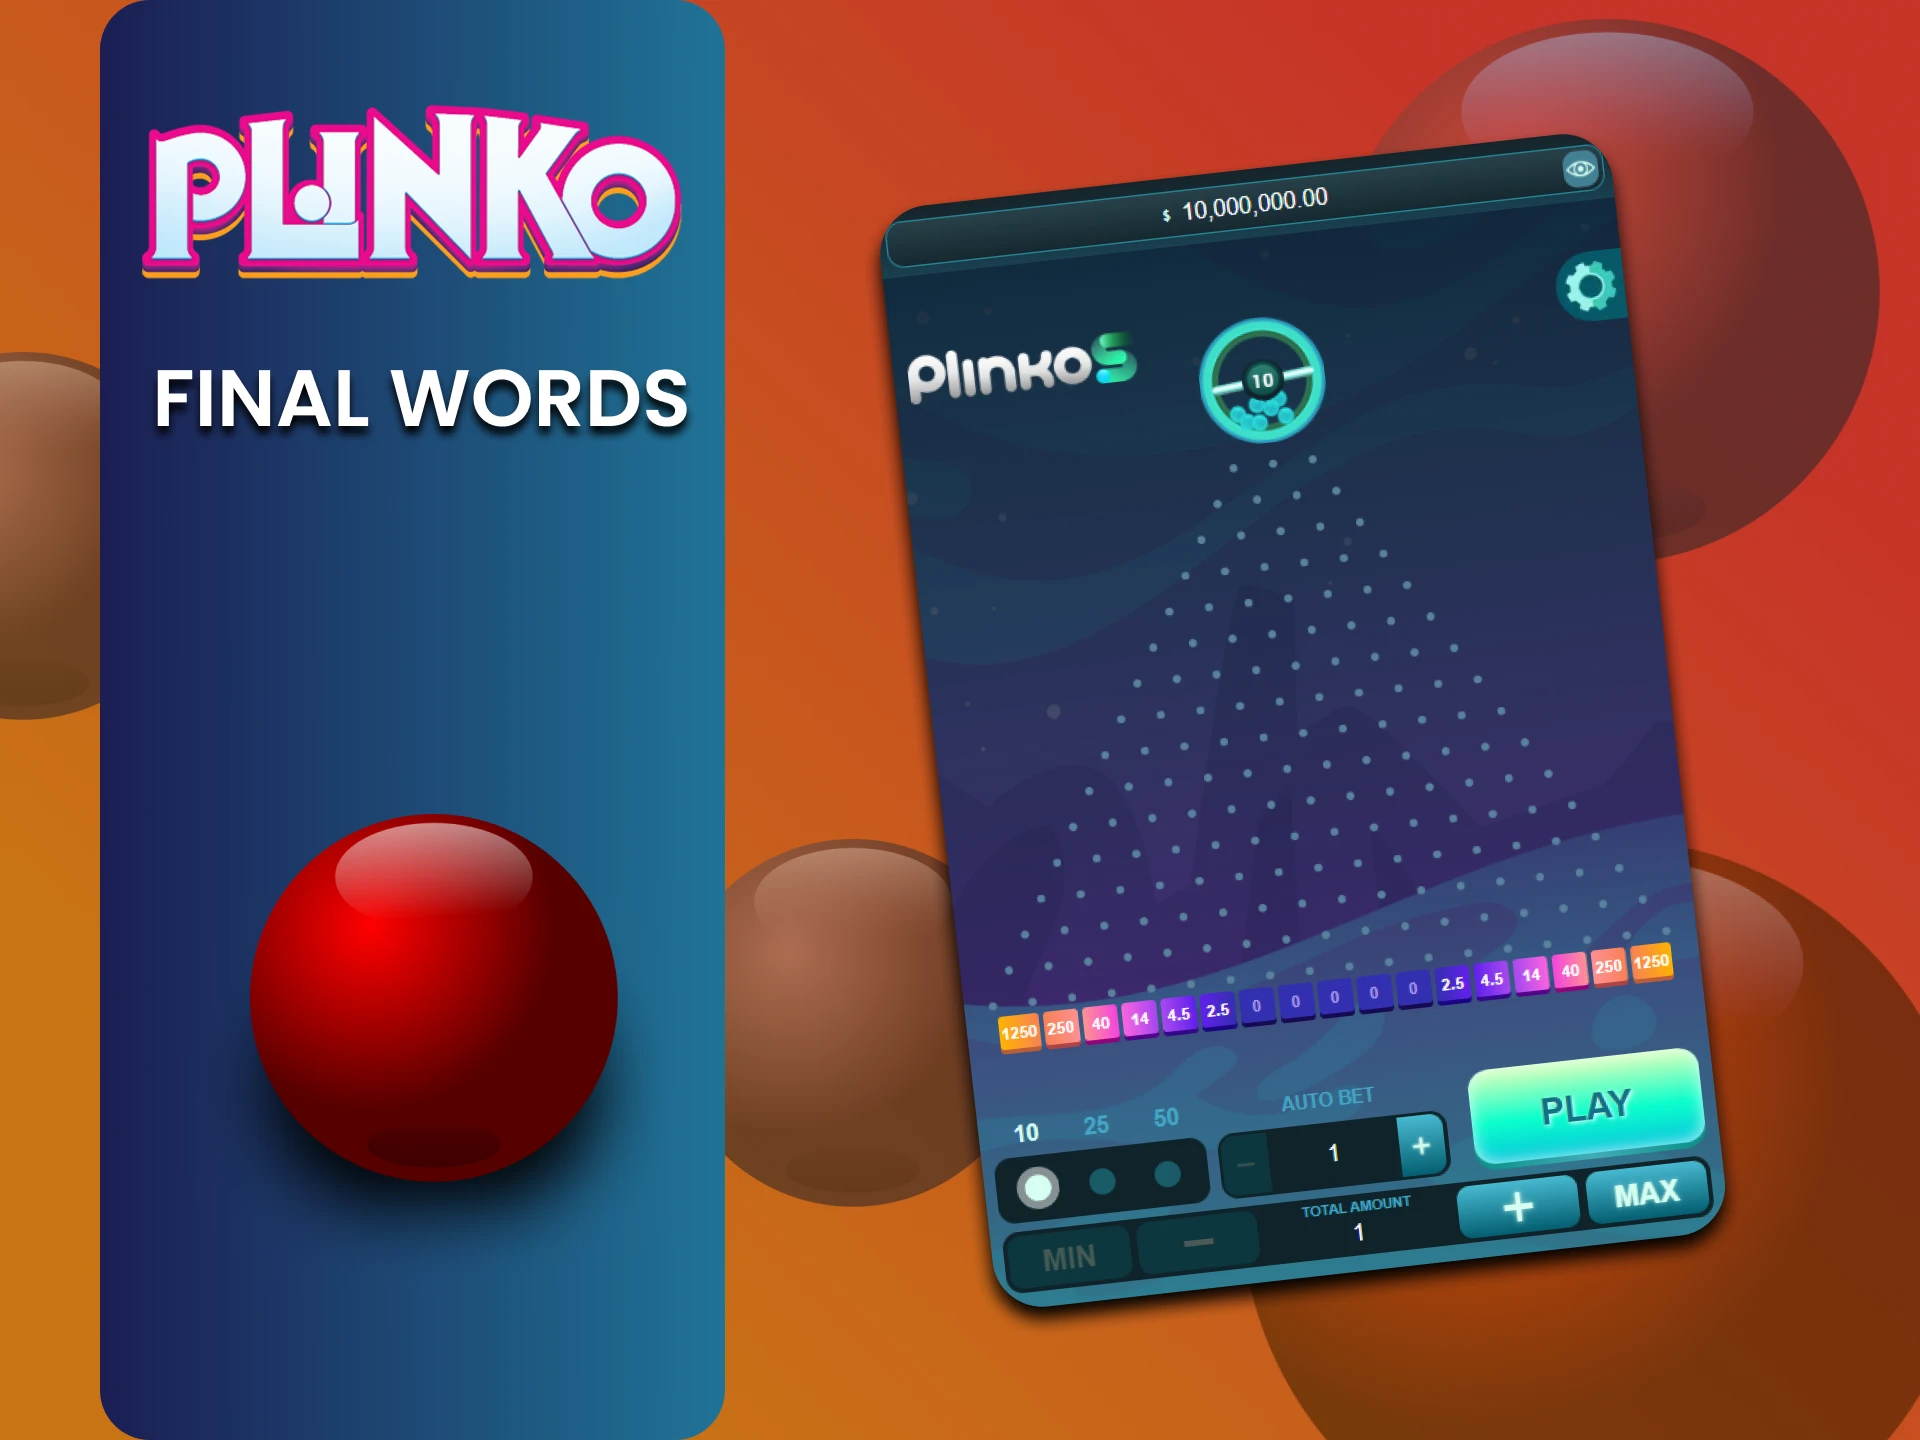 Plinko is a real game loved by many users.